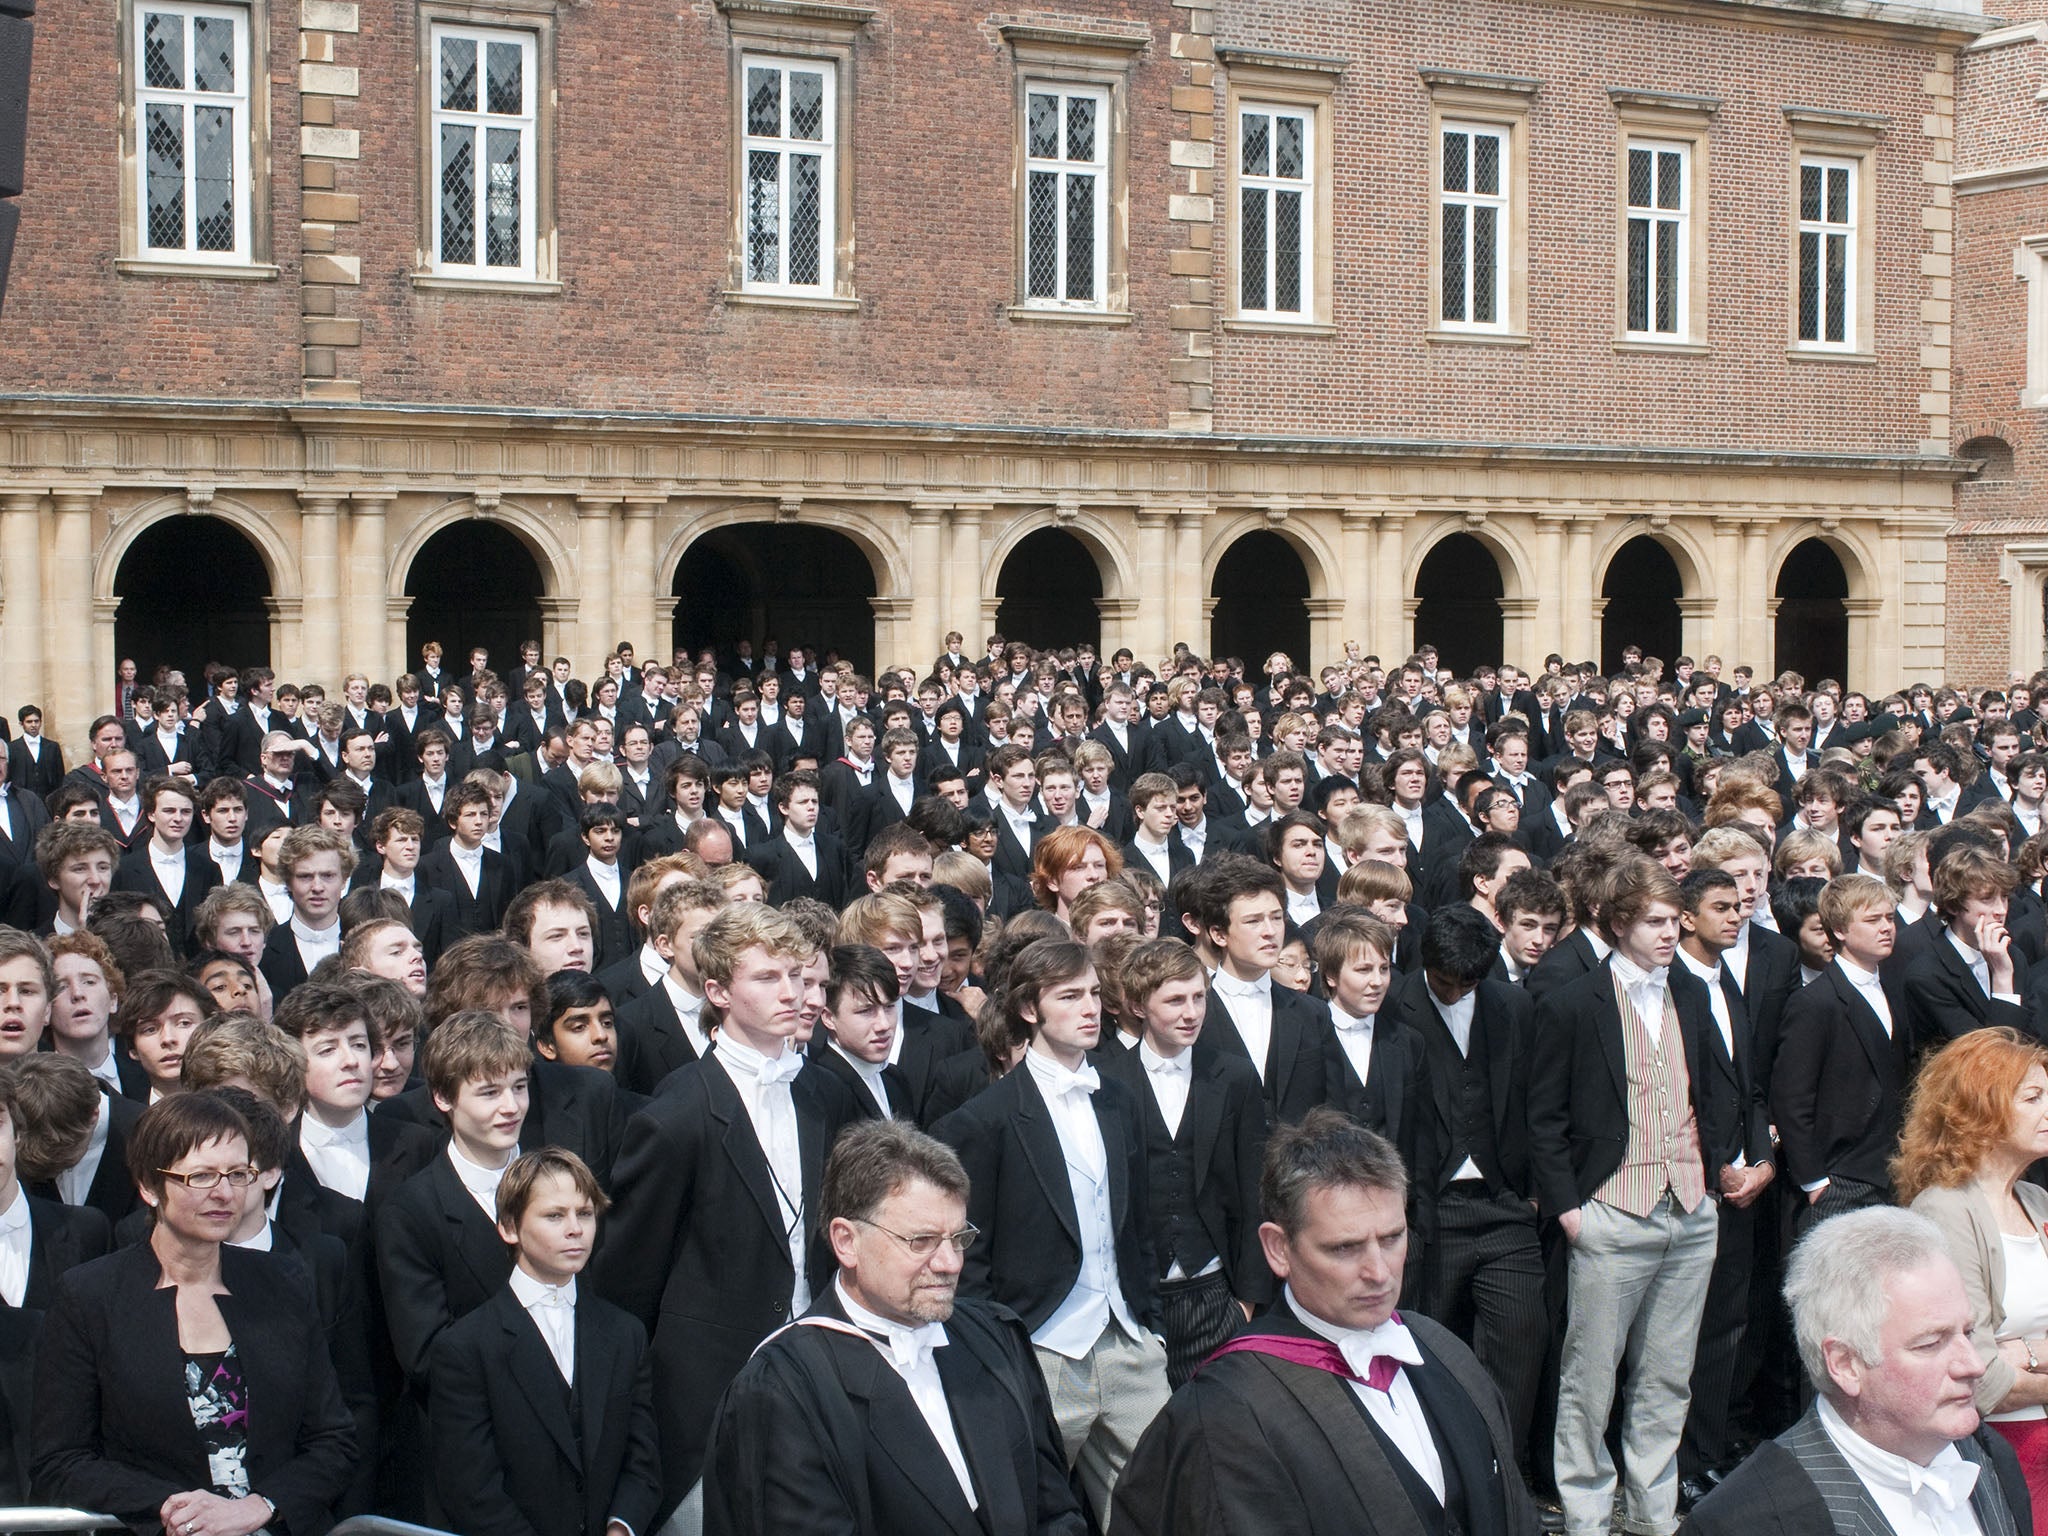 The notoriously elitist Eton College. Some say assisted places to such institutions would help level the educational playing field; critics fear a detrimental effect on the state sector